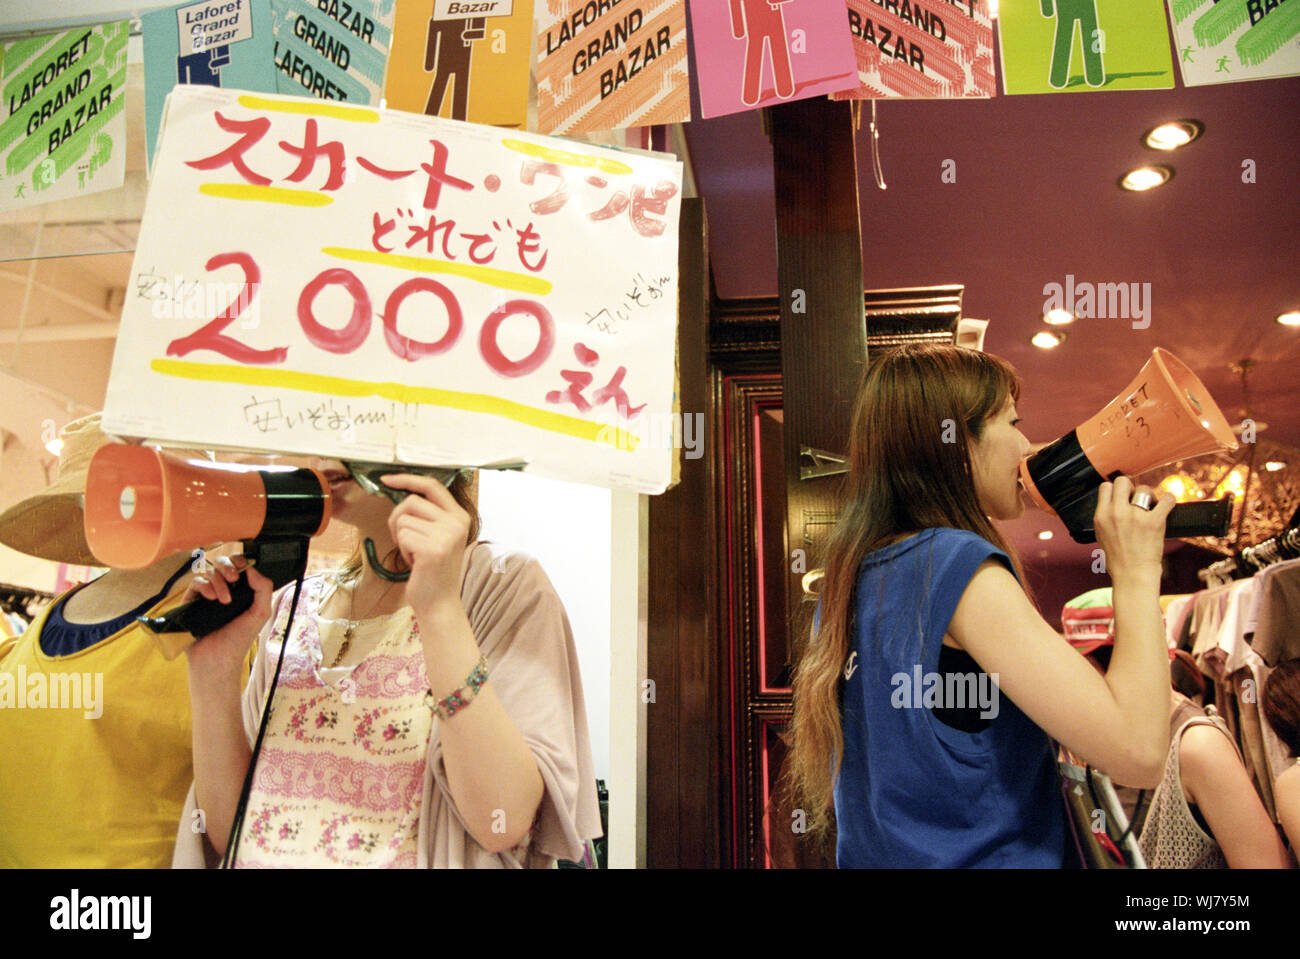 Shop workers try to attract shoppers to their stalls in the La Floret Store,  Harajuku Distric, Tokyo, Japan. Stock Photo